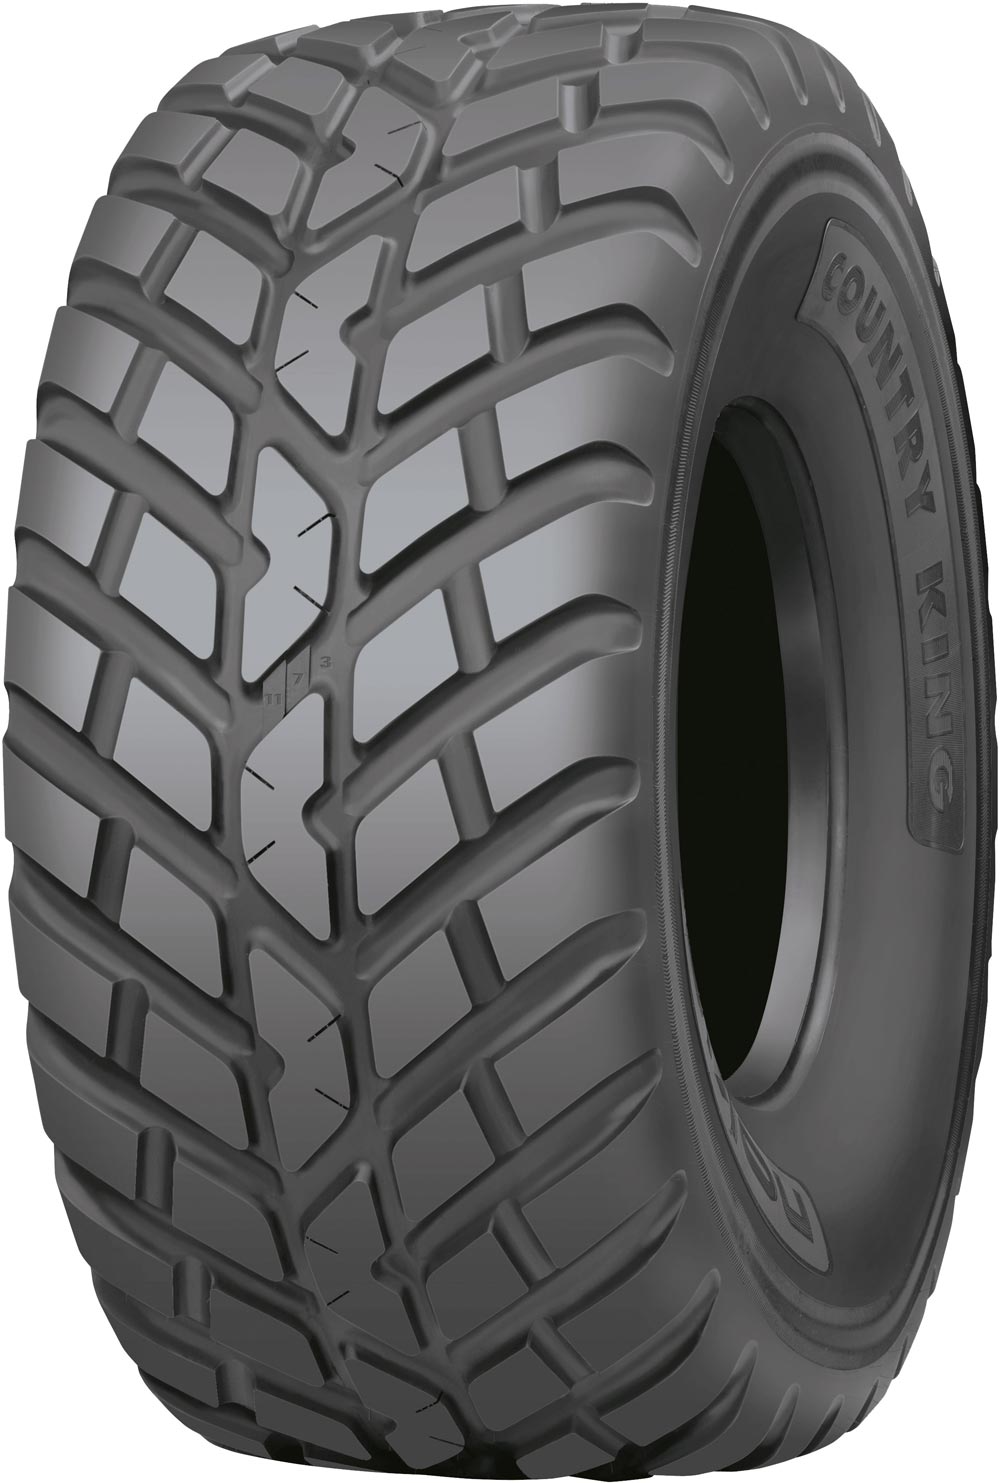 product_type-industrial_tires NOKIAN COUNTRY KING TL 600/50 R22.5 159D